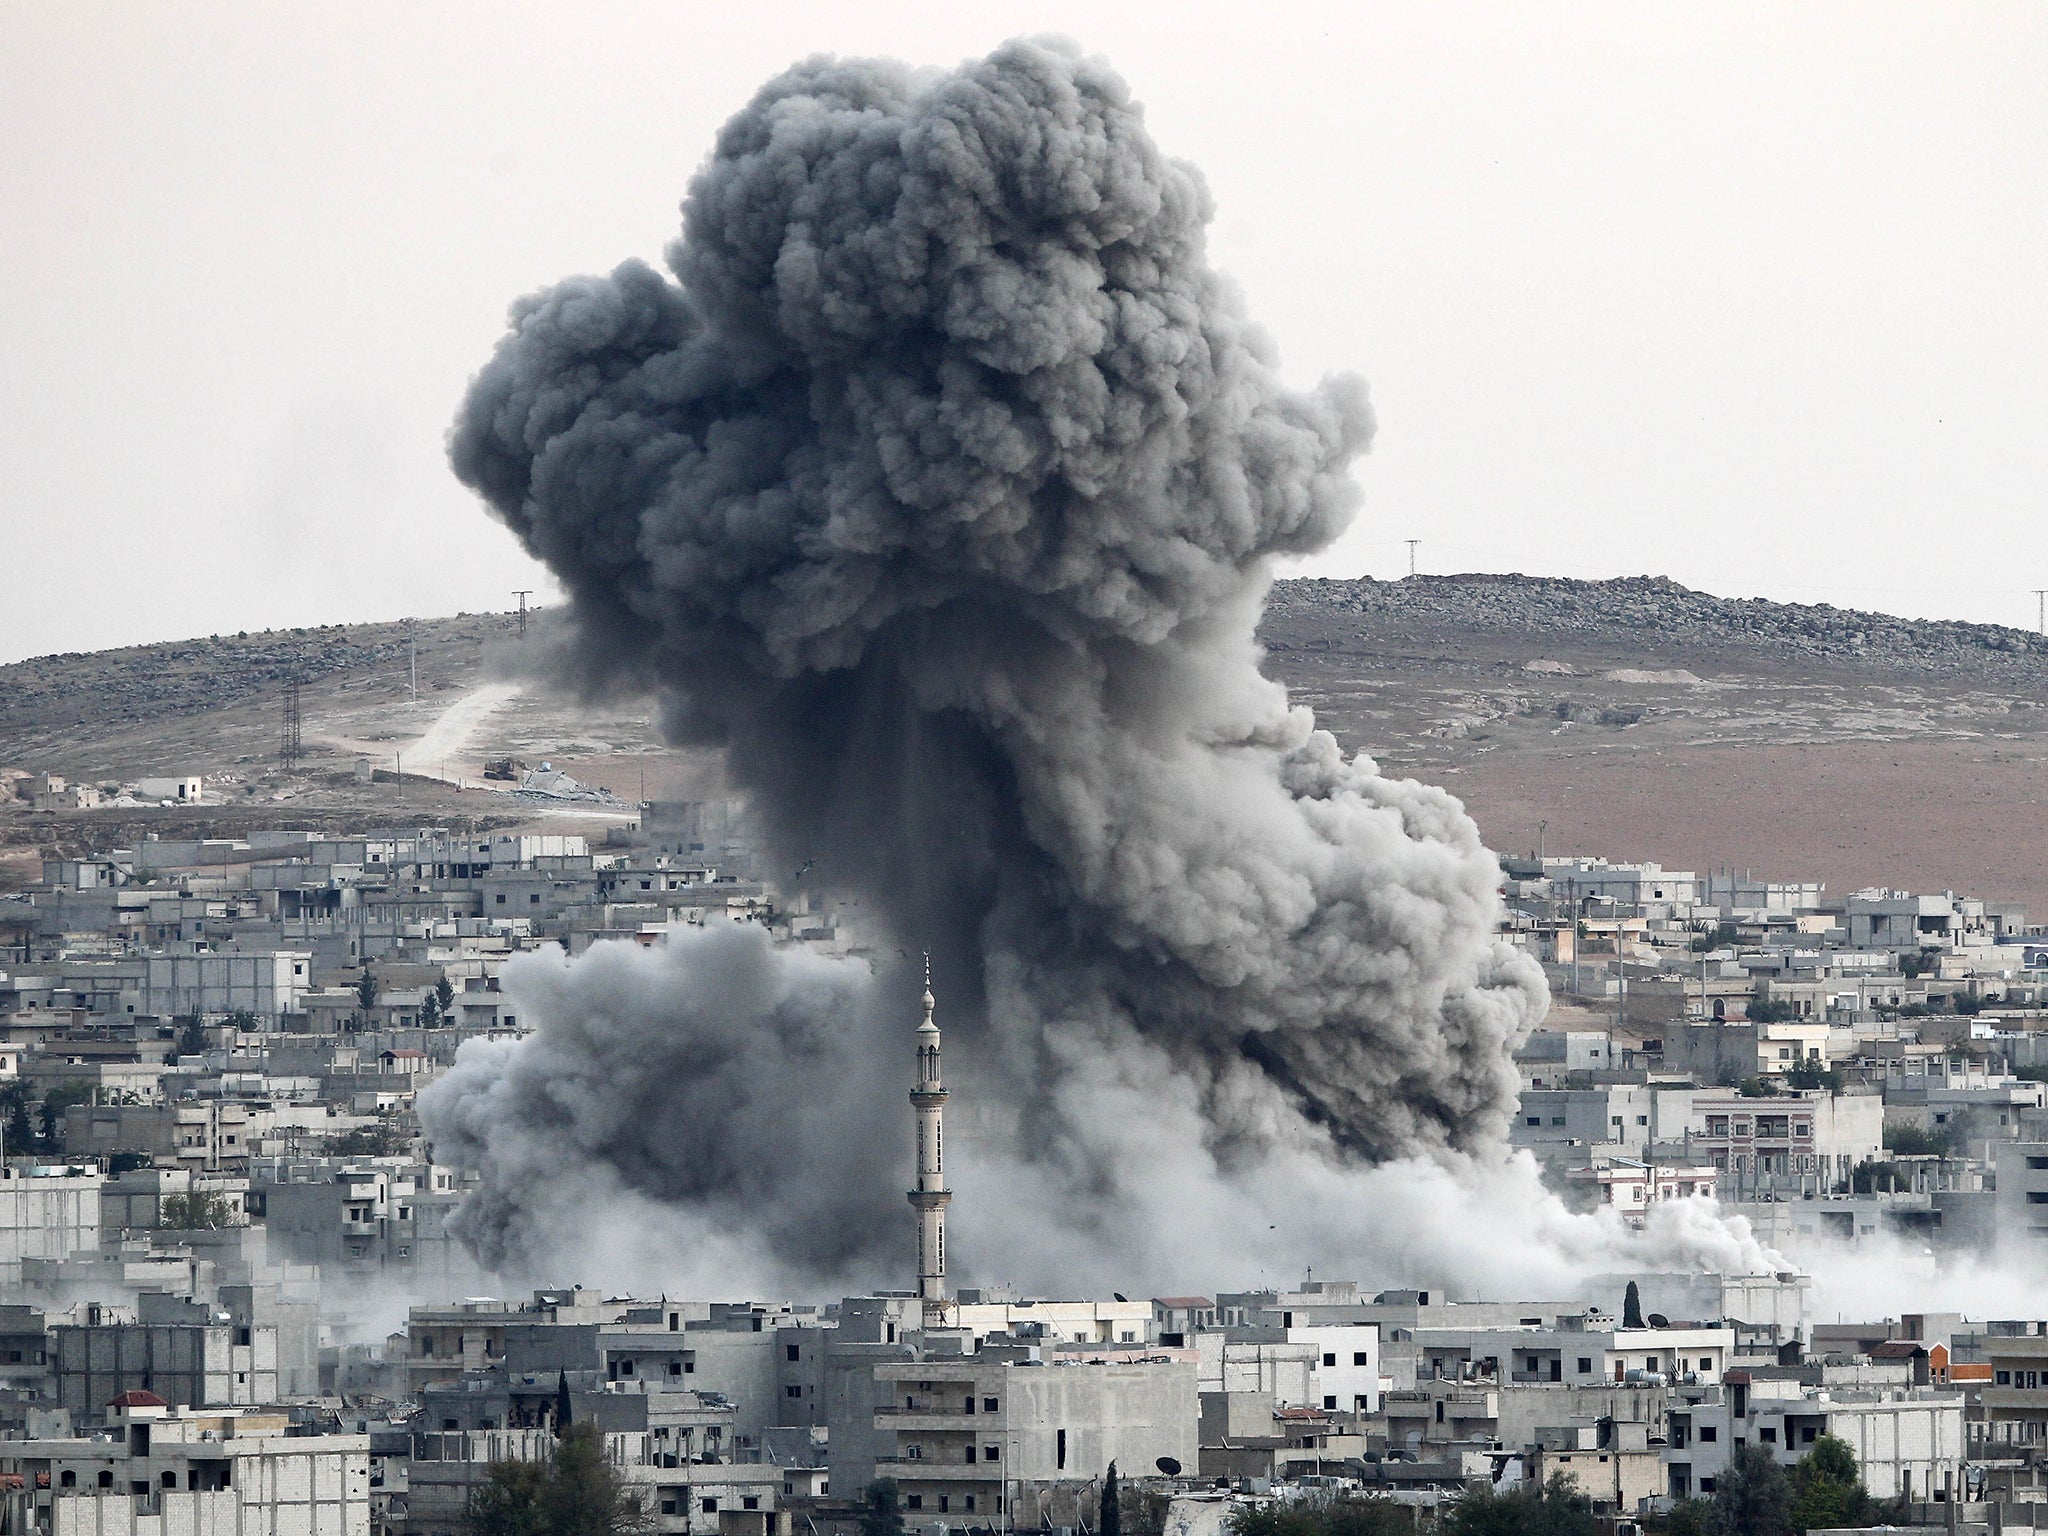 An air strike against Isis by the US-led coalition in Kobani, Syria